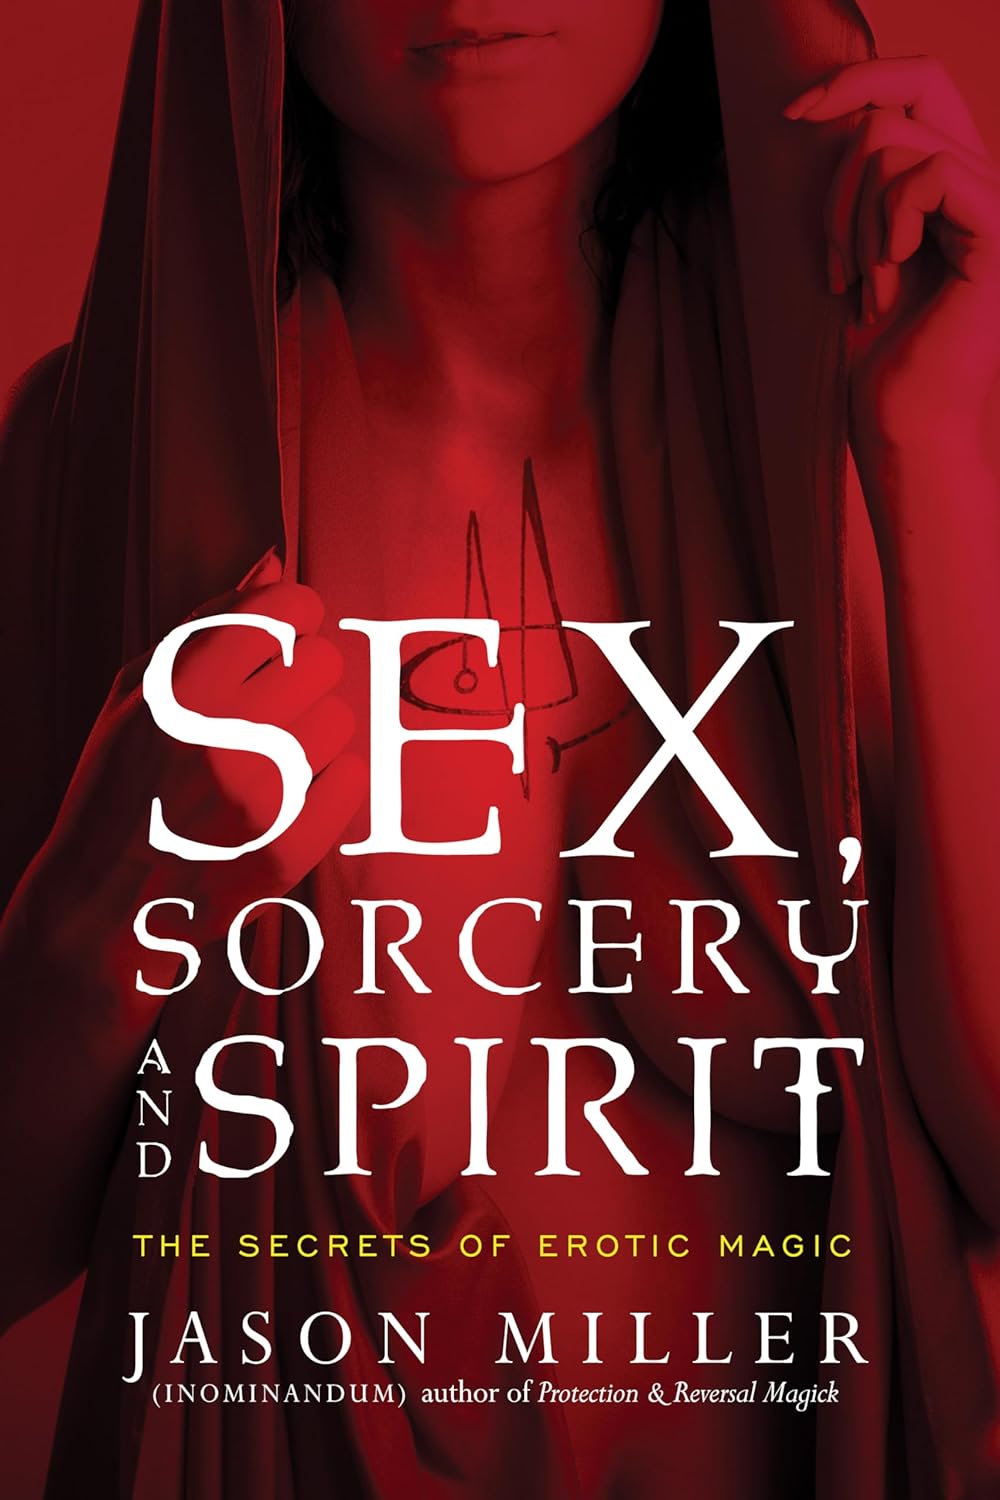 Sex, Sorcery, and Spirit: The Secrets of Erotic Magic by Jason Miller